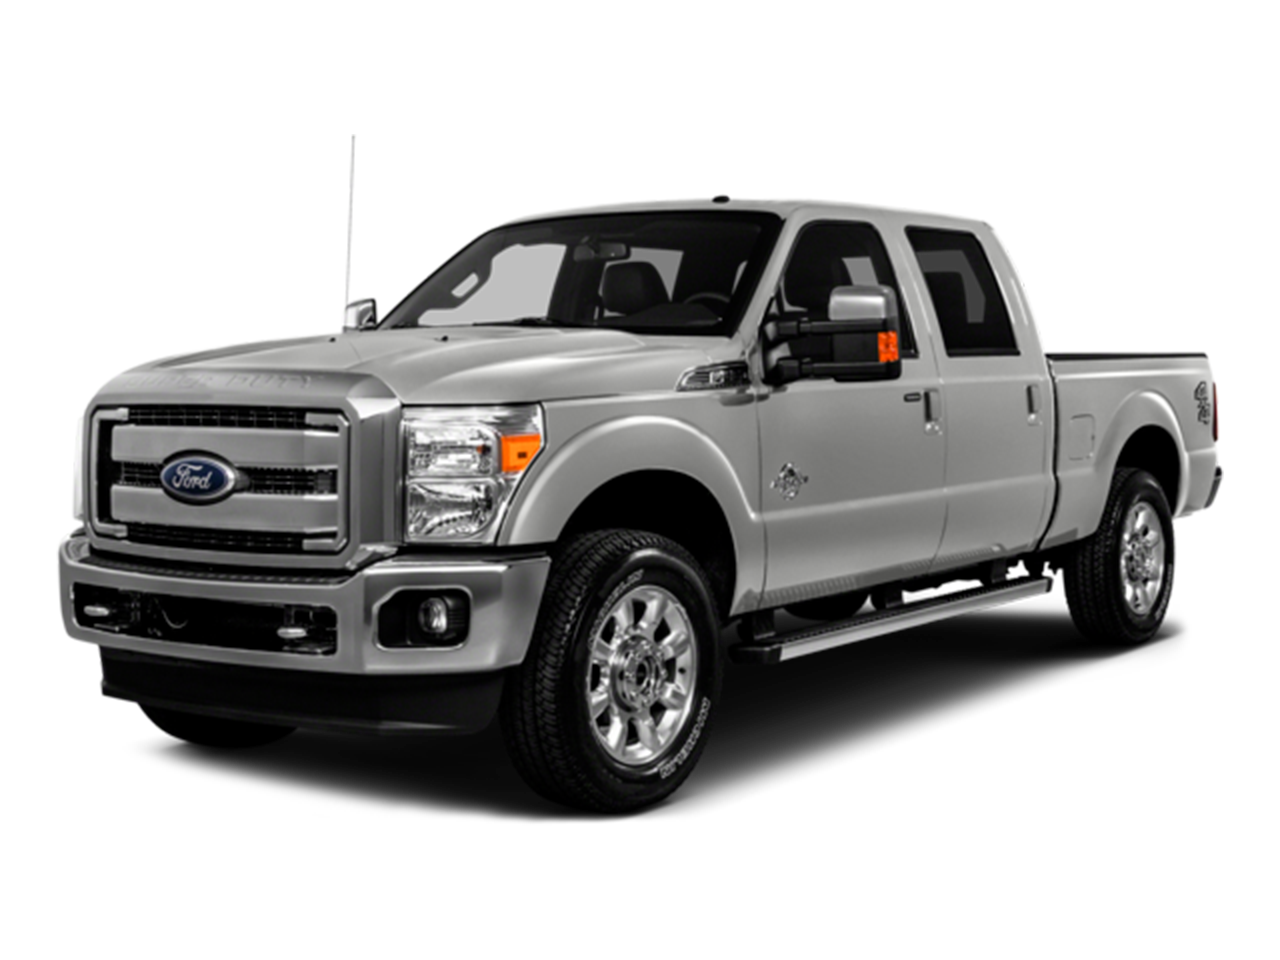 Ford Super Duty Backgrounds on Wallpapers Vista